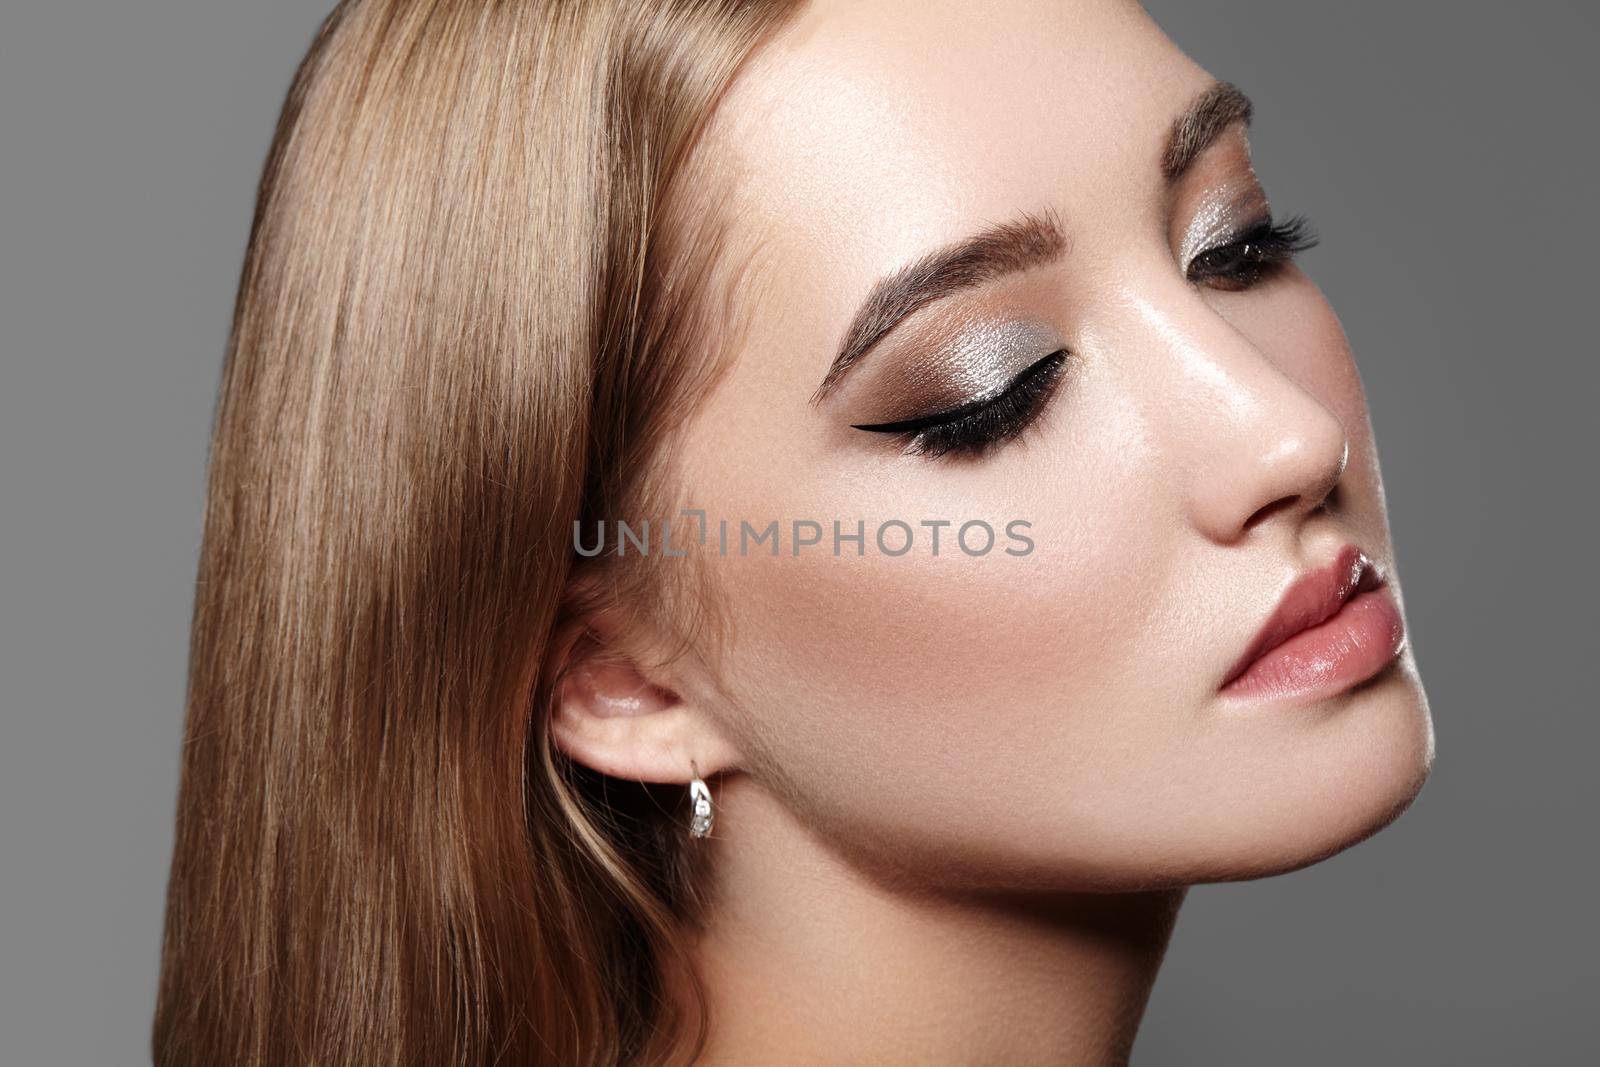 Beautiful Woman with Professional Makeup. Celebrate Style Eye Make-up, Perfect Eyebrows, Shine Skin. Bright Fashion Look. Black Liner, Shimmer Powder and Silver Eyeshadows